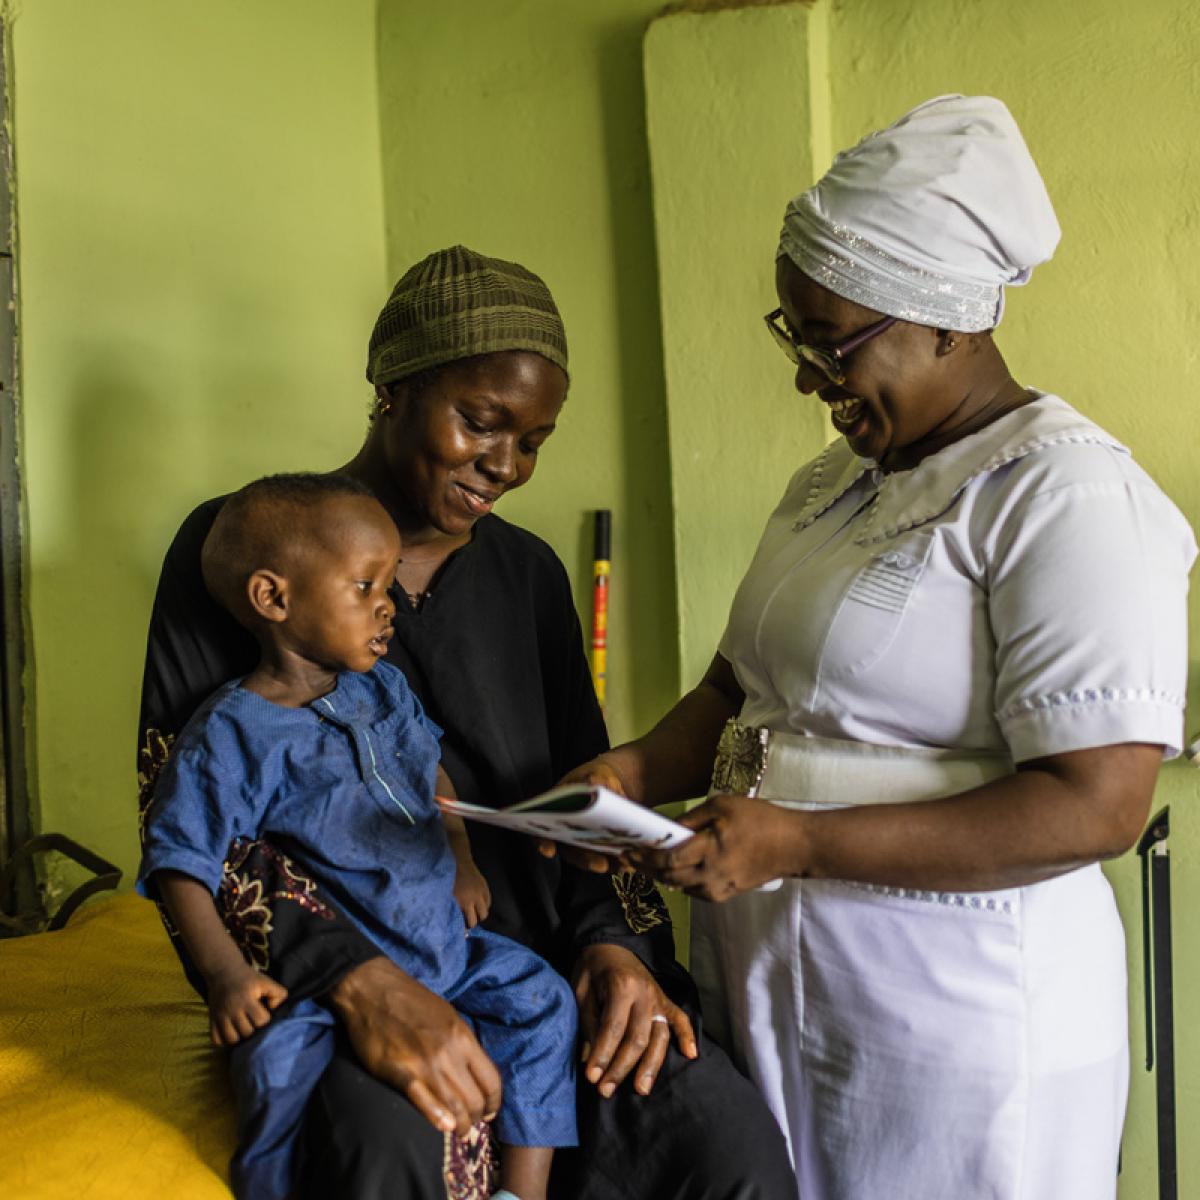 Adama, the lead midwife at Tamale Reproductive and Child Health Center in northern Ghana, shares health information with a mother and child.